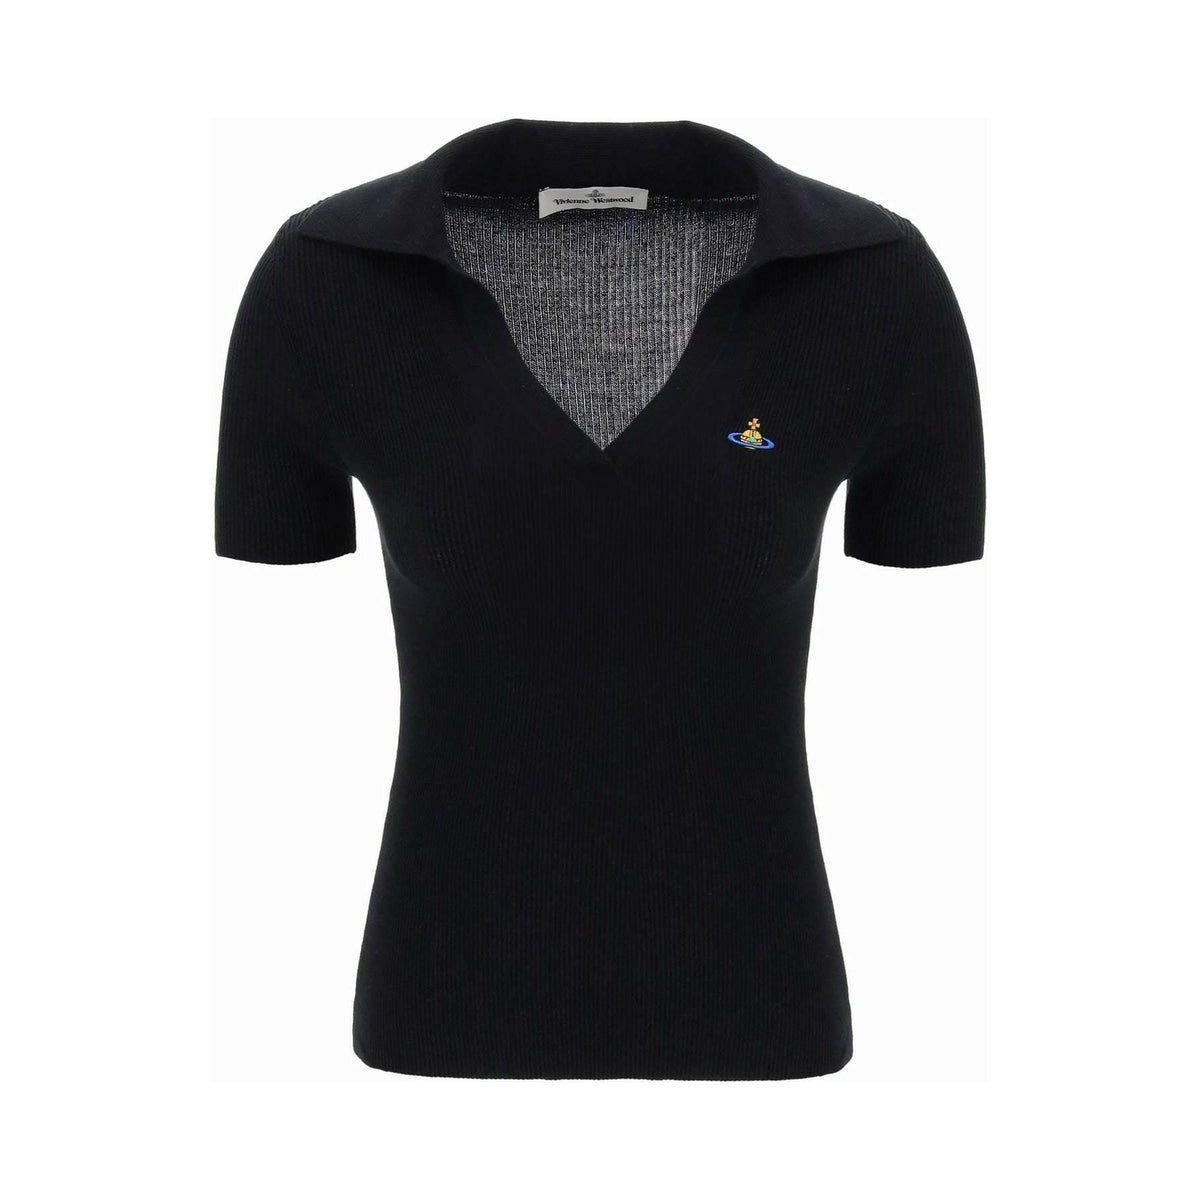 VIVIENNE WESTWOOD - Black Ribbed Cotton Marina Polo With Orb Embroidery - JOHN JULIA